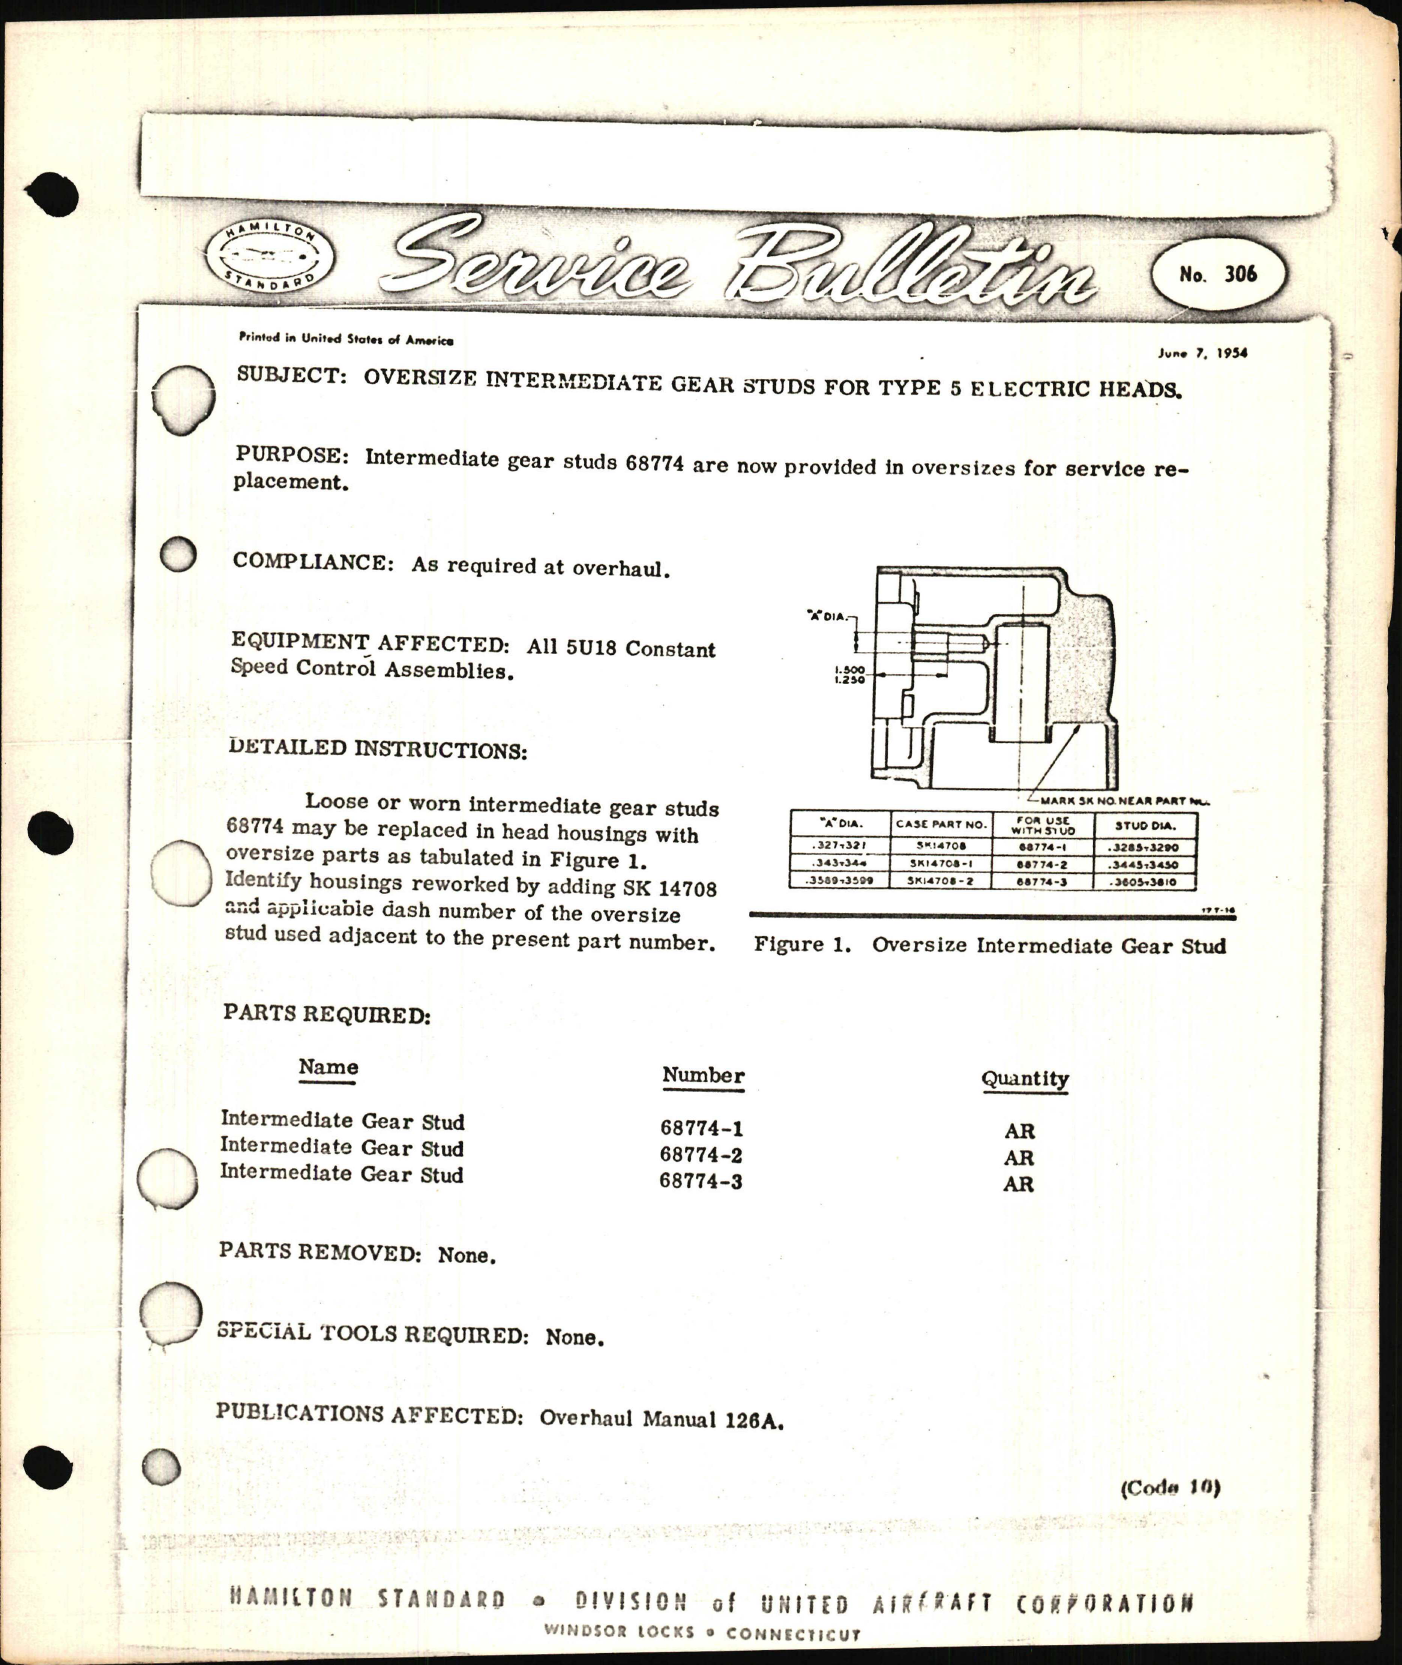 Sample page 1 from AirCorps Library document: Oversize Intermediate Gear Studs for Type 5 Electric Heads